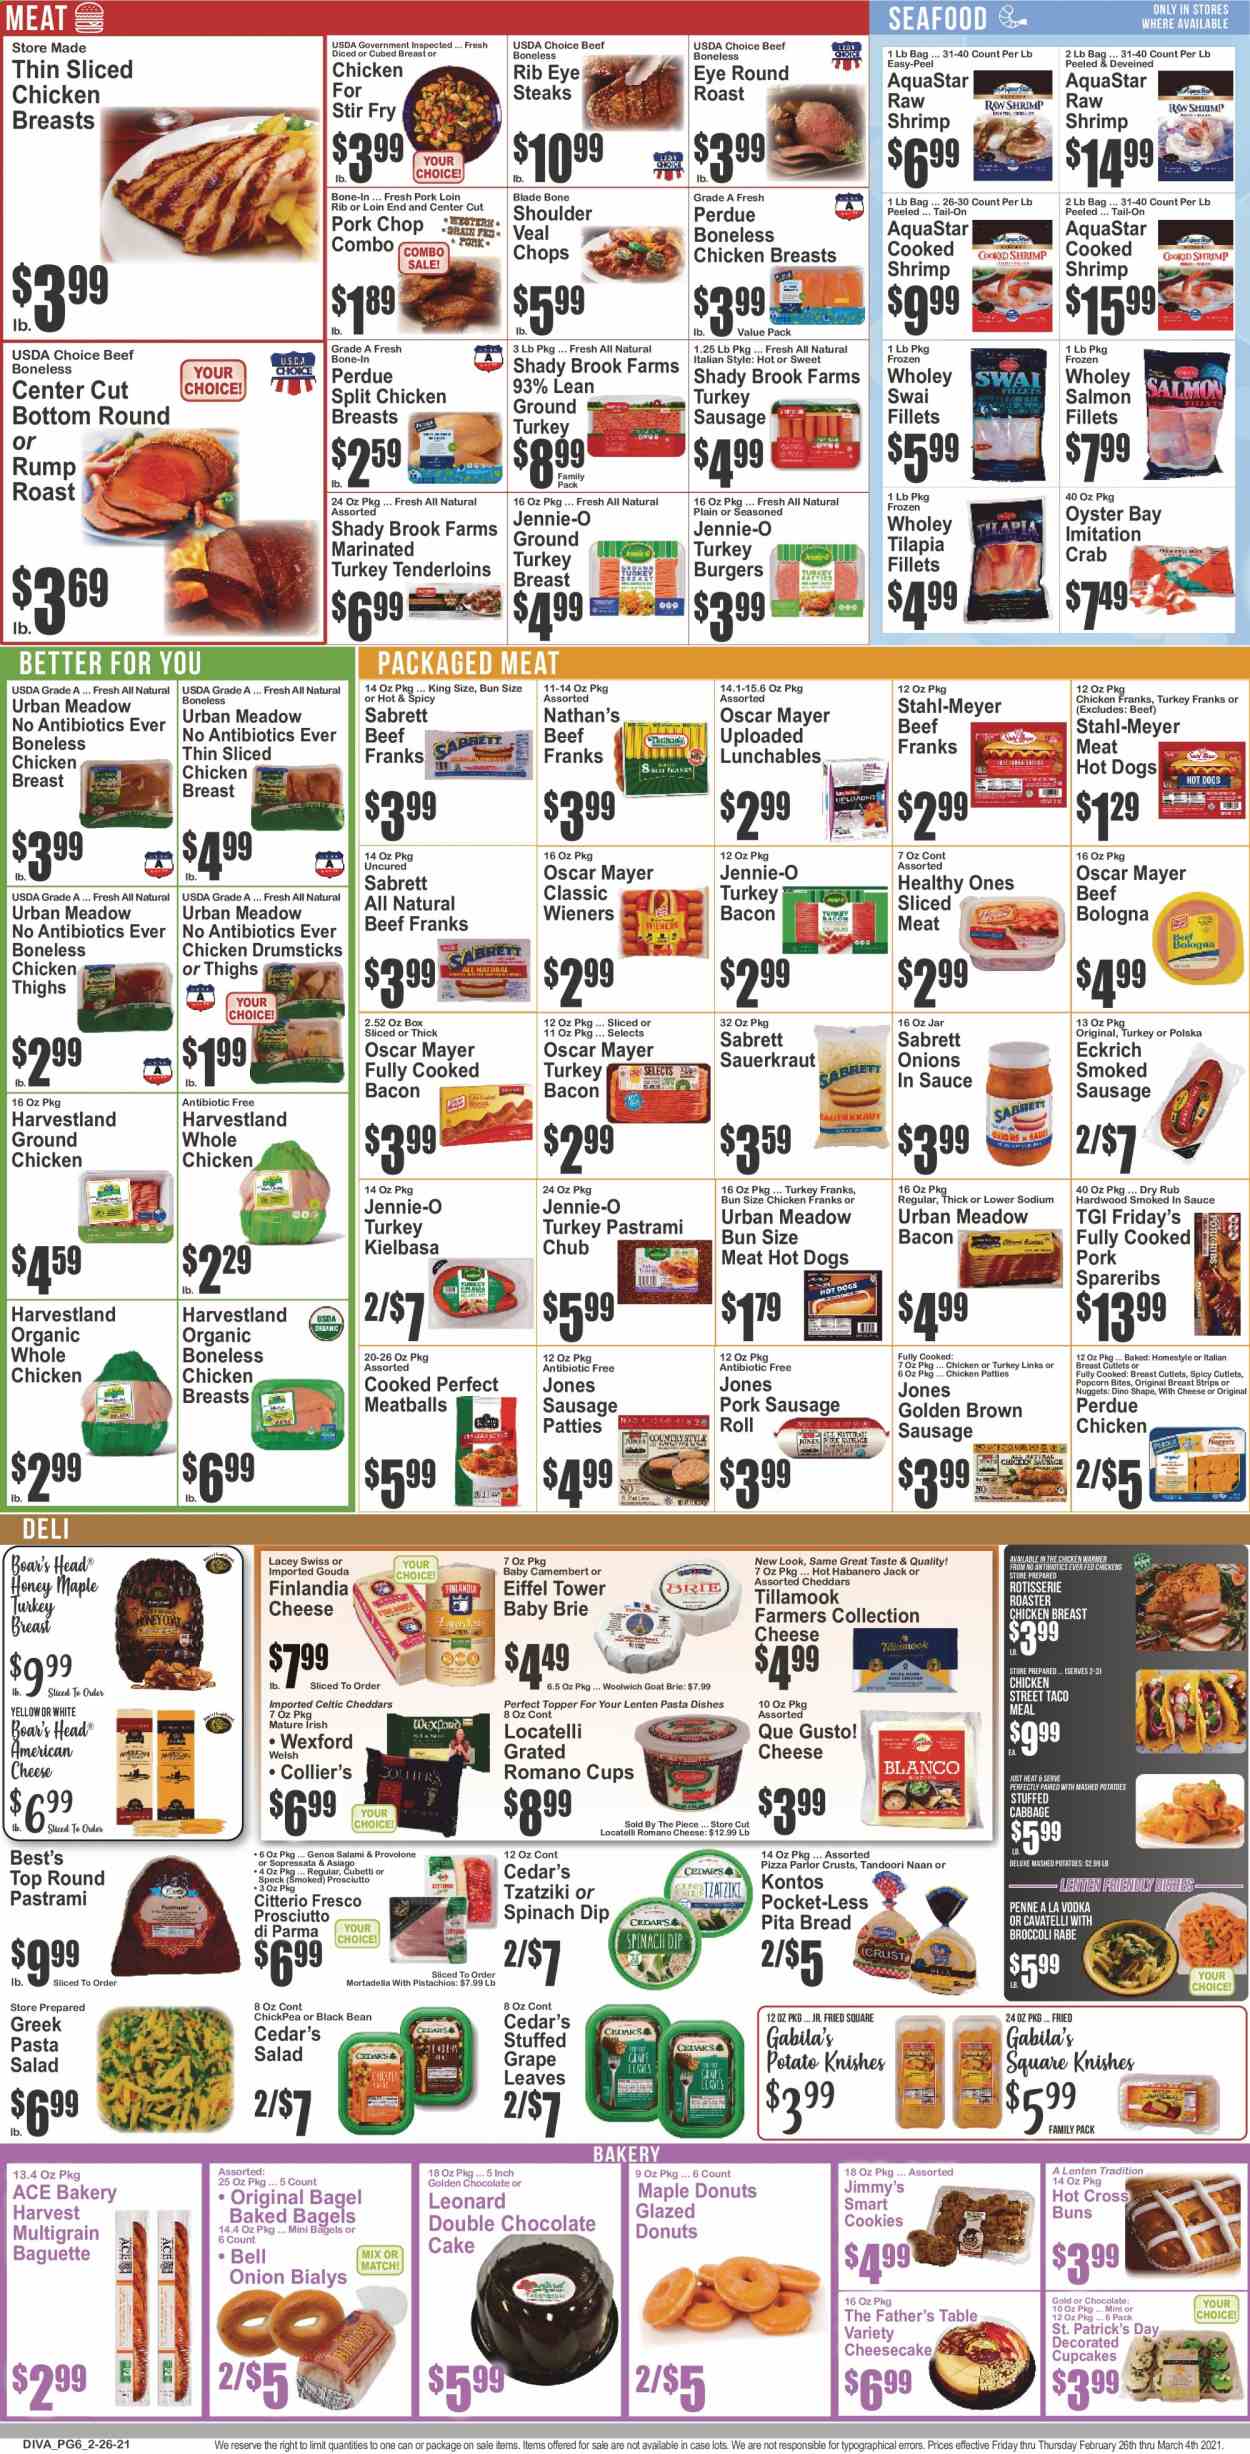 thumbnail - Key Food Flyer - 02/26/2021 - 03/04/2021 - Sales products - baguette, bread, sausage rolls, pita, Father's Table, bagels, cupcake, cheesecake, cake, donut, buns, salmon, salmon fillet, tilapia, seafood, crab, shrimps, swai fillet, mashed potatoes, hot dog, pizza, meatballs, nuggets, hamburger, salad, Perdue®, Lunchables, bacon, salami, turkey bacon, prosciutto, bologna sausage, Oscar Mayer, sausage, smoked sausage, chicken frankfurters, tzatziki, pasta salad, american cheese, asiago, camembert, gouda, mortadella, brie, dip, beans, spinach, strips, chicken patties, cookies, chocolate, popcorn, sauerkraut, penne, pork sausage, honey, pistachios, vodka, ground chicken, ground turkey, turkey breast, whole chicken, chicken breasts, chicken thighs, chicken drumsticks, beef meat, veal cutlet, veal meat, pastrami, steak, round roast, pork chops, pork loin, pork meat, pork spare ribs, Ace, cup. Page 6.